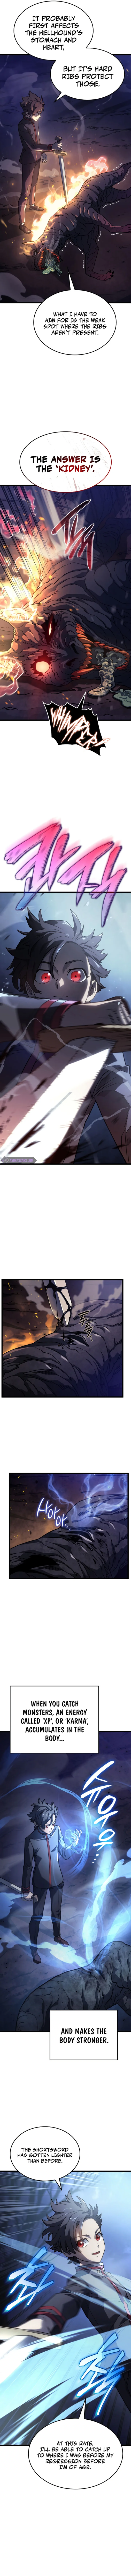 Revenge of the Iron-Blooded Sword Hound - Chapter 5 Page 6